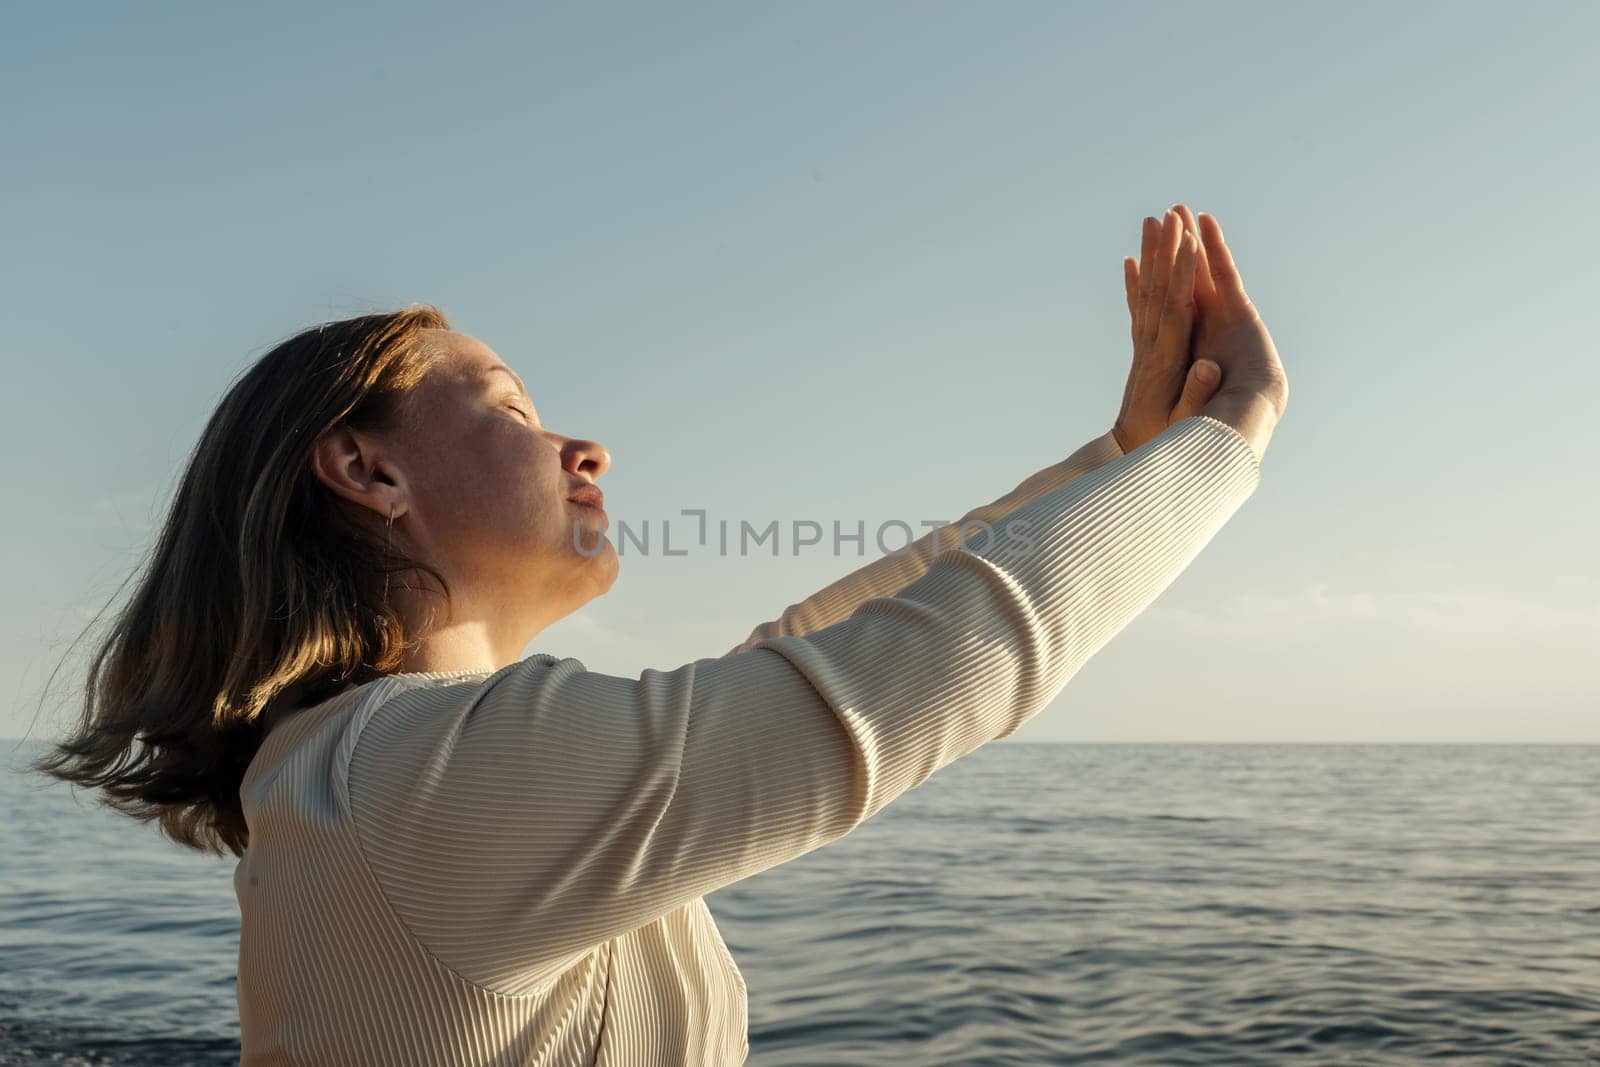 A woman stands confidently on the deck of a boat, overlooking the vast ocean.